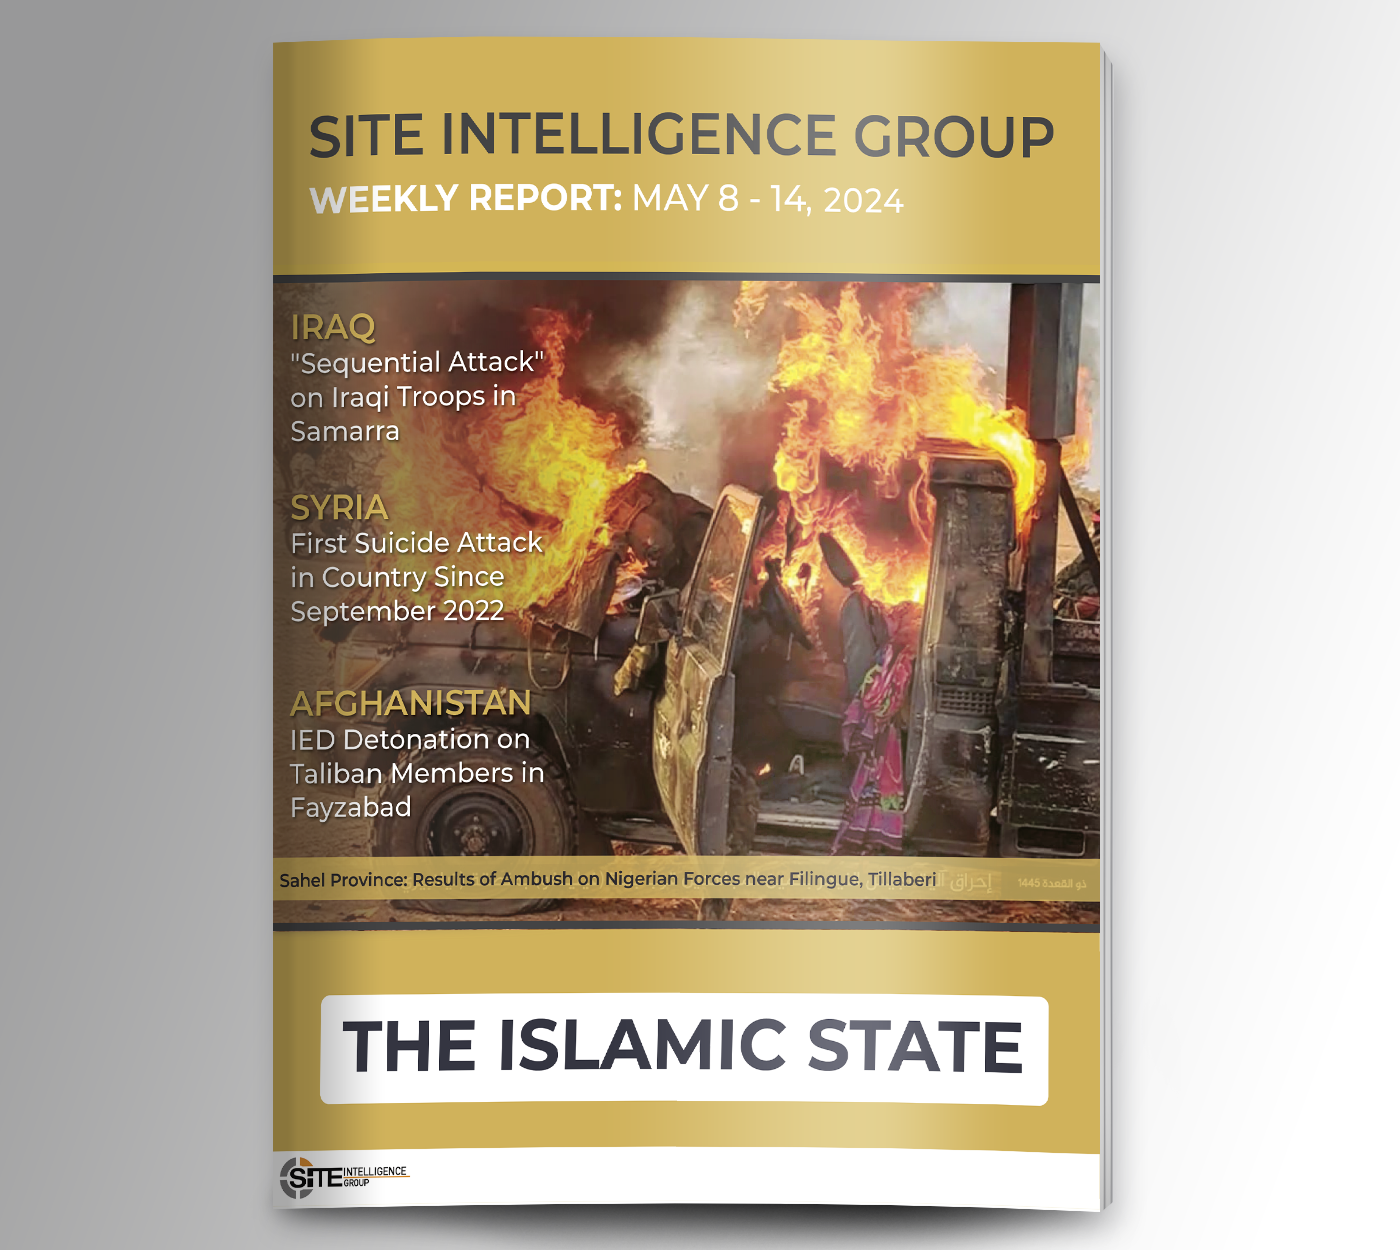 Weekly inSITE on the Islamic State for May 8-14, 2024